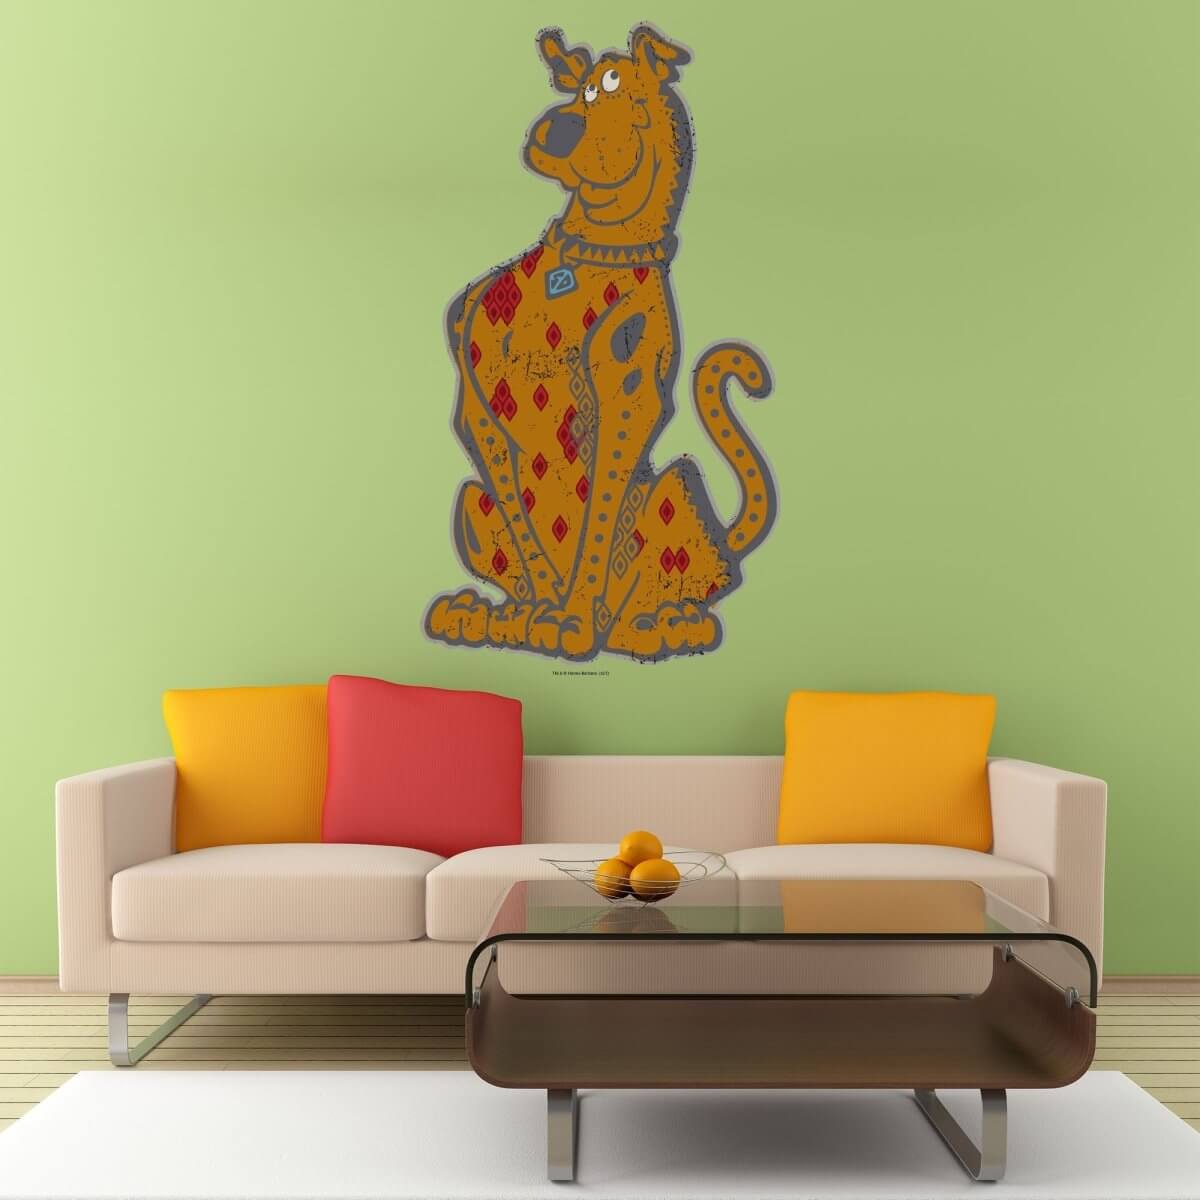 Kismet Decals Home & Room Decor Scooby-Doo Good Boy, Scooby! Wall decal sticker - officially licensed - latex printed with no solvent odor - Kismet Decals